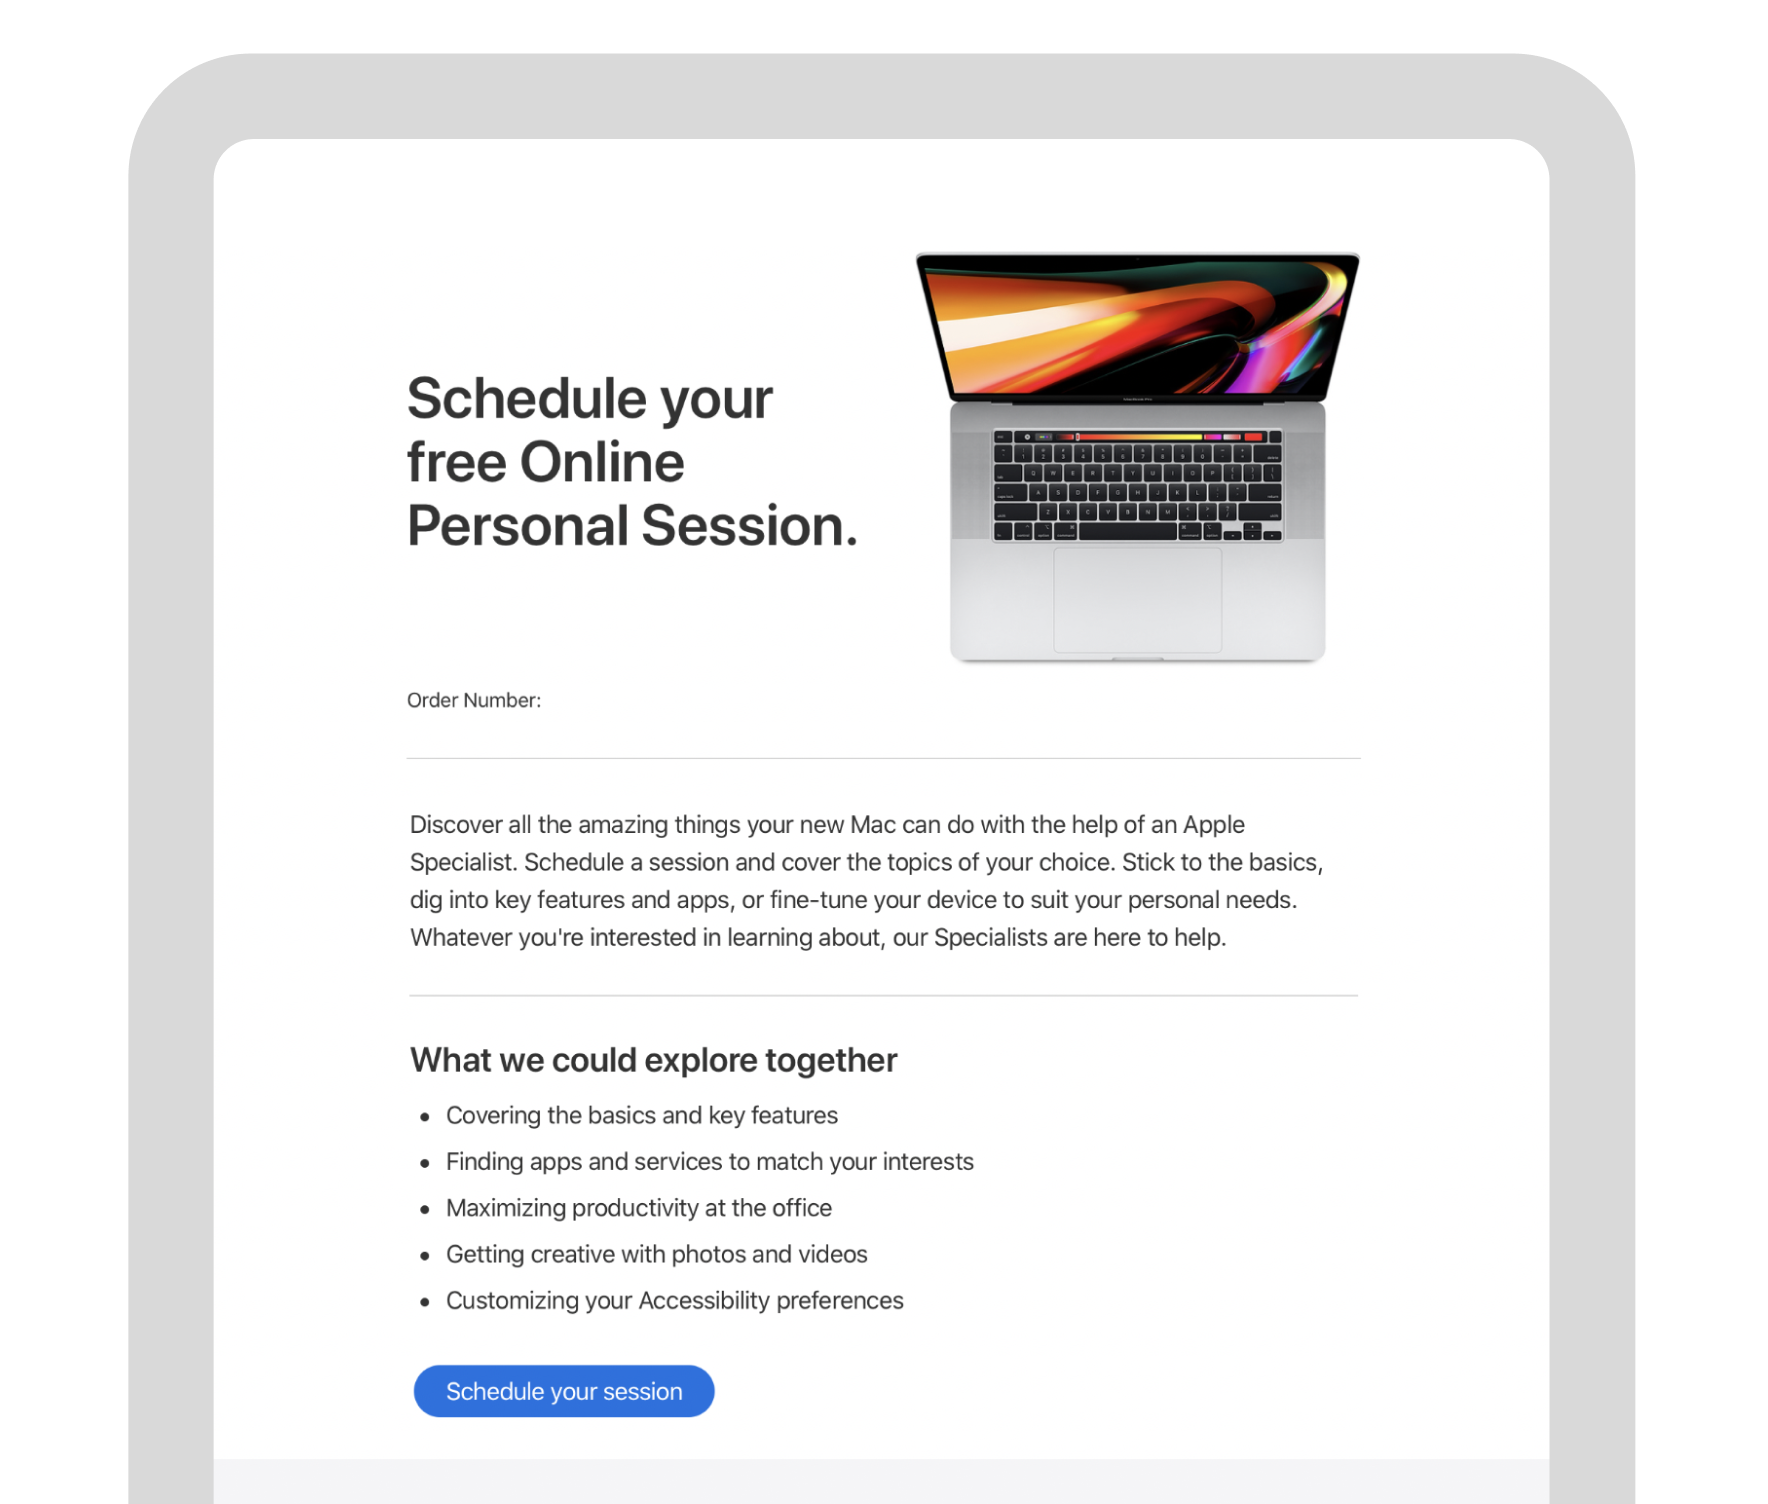 Apple’s personalized email